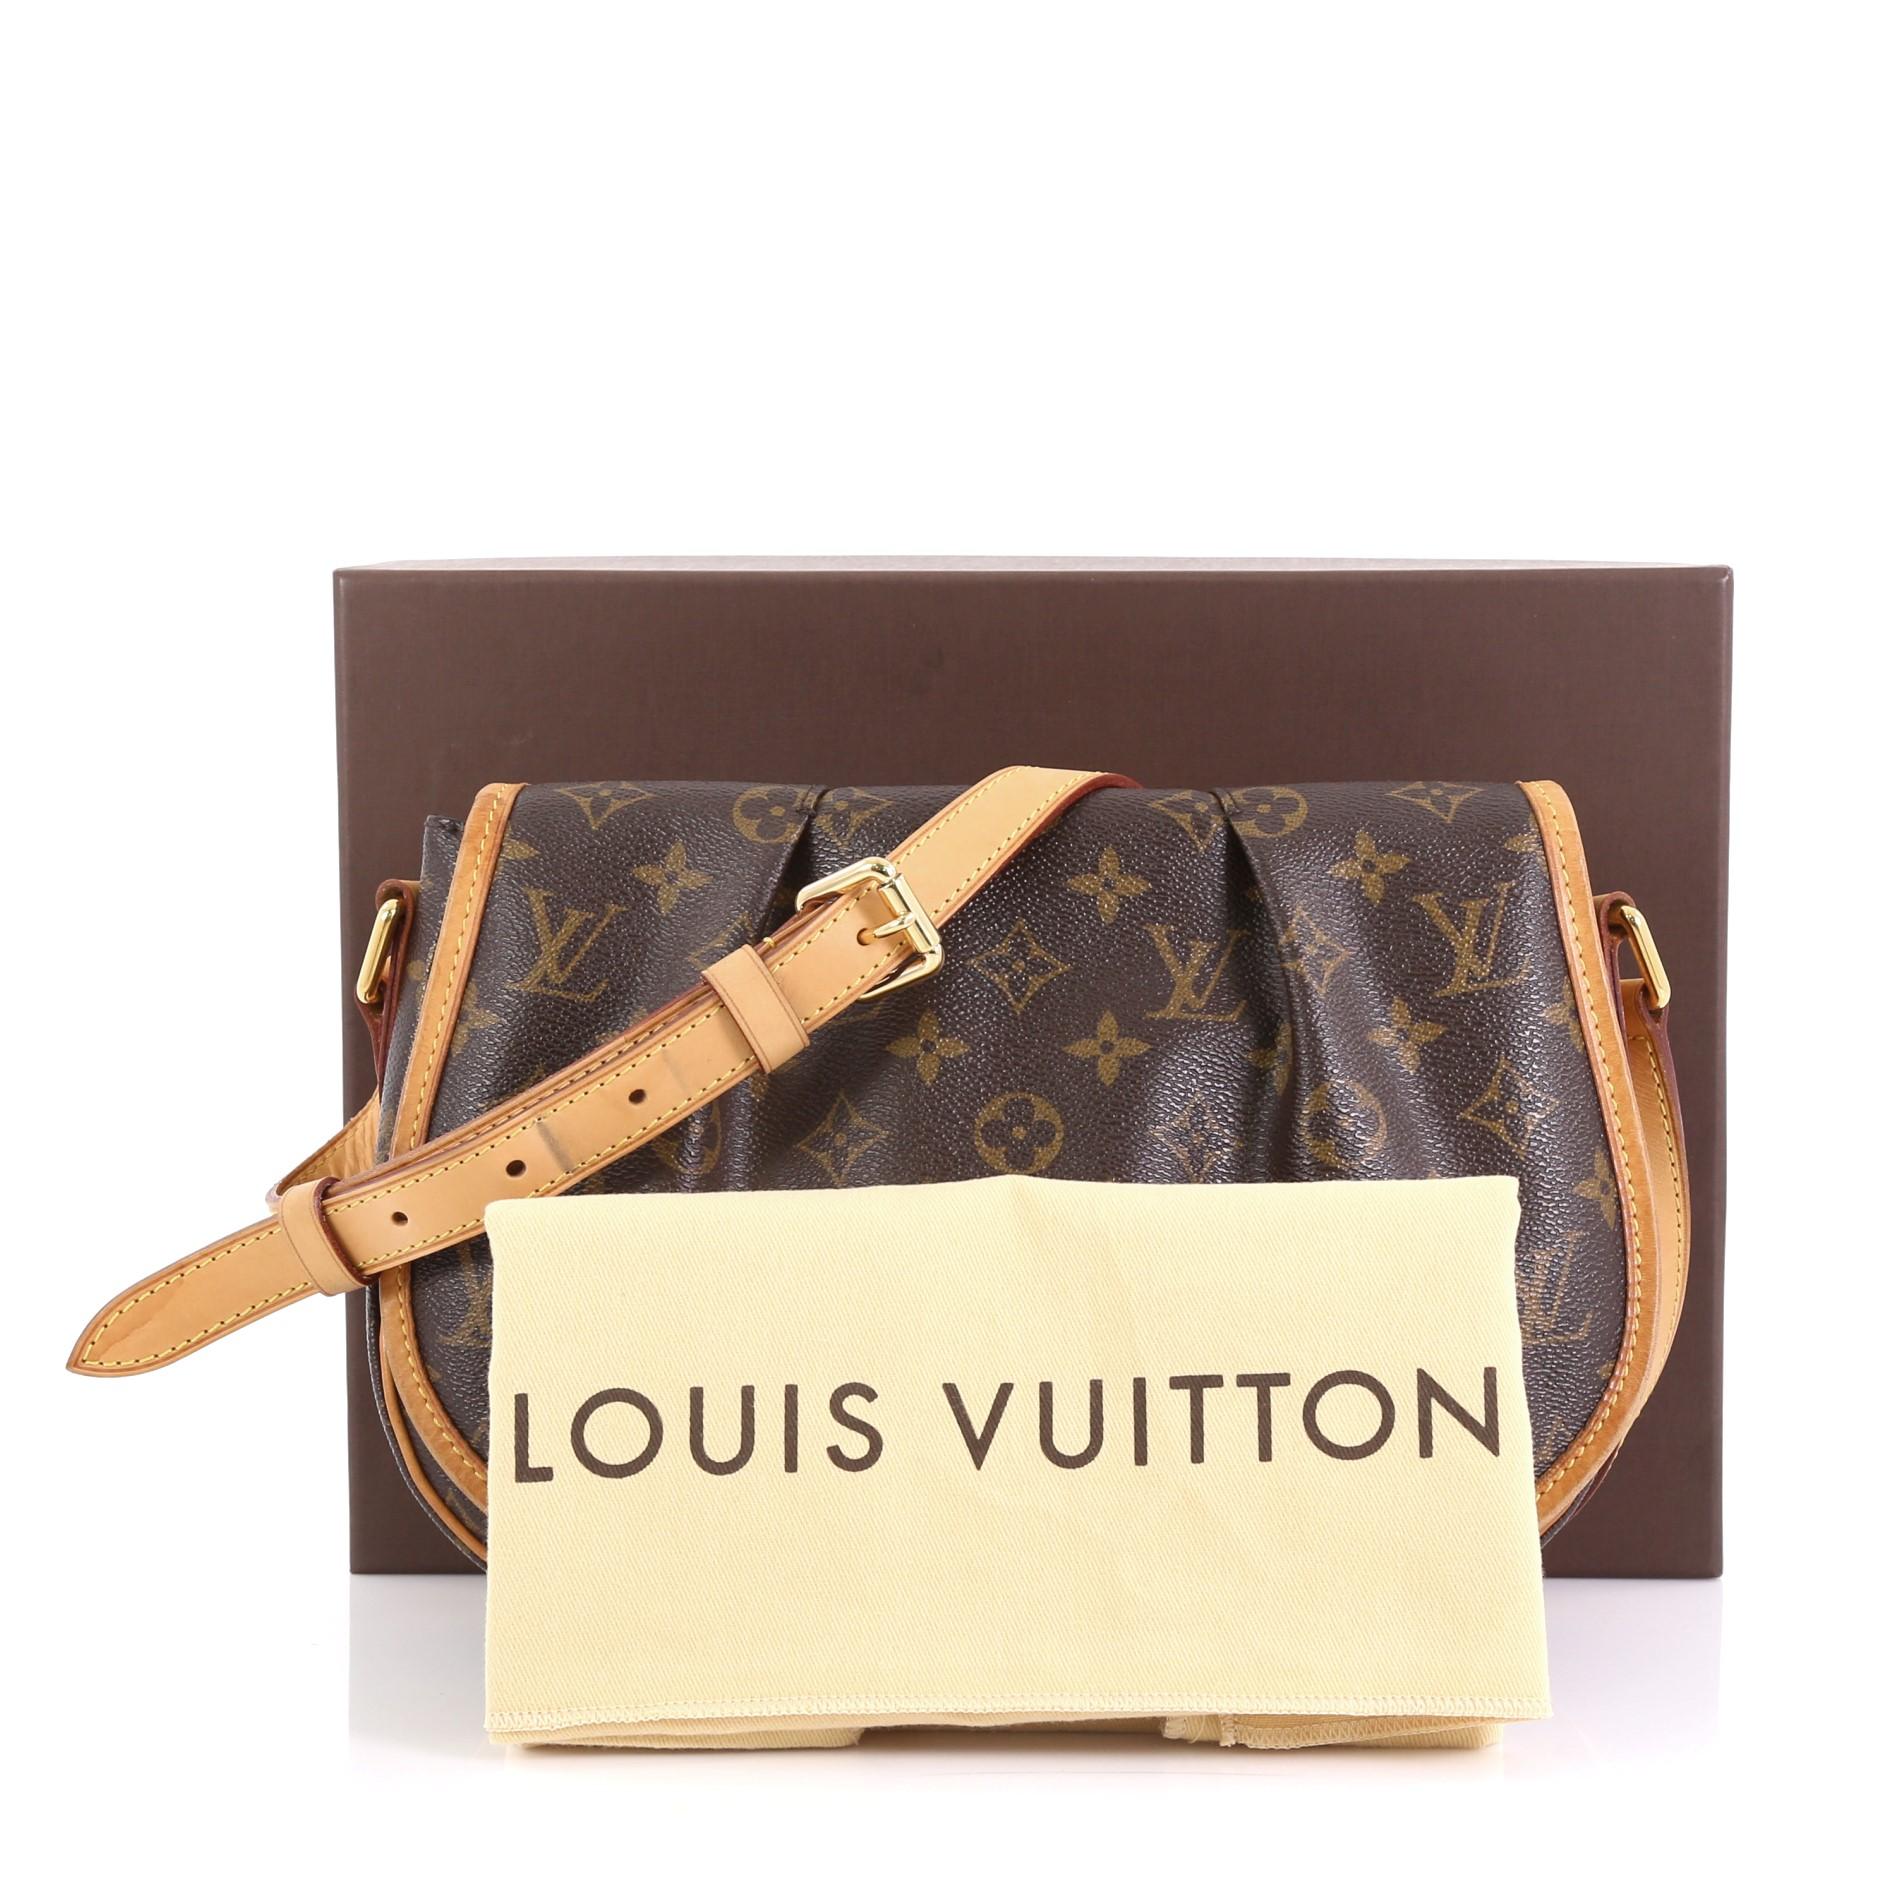 This Louis Vuitton Menilmontant Handbag Monogram Canvas PM, crafted in brown monogram coated canvas, features a full frontal flap with pleated design, adjustable leather strap, and gold-tone hardware. Its magnetic snap closure opens to a brown